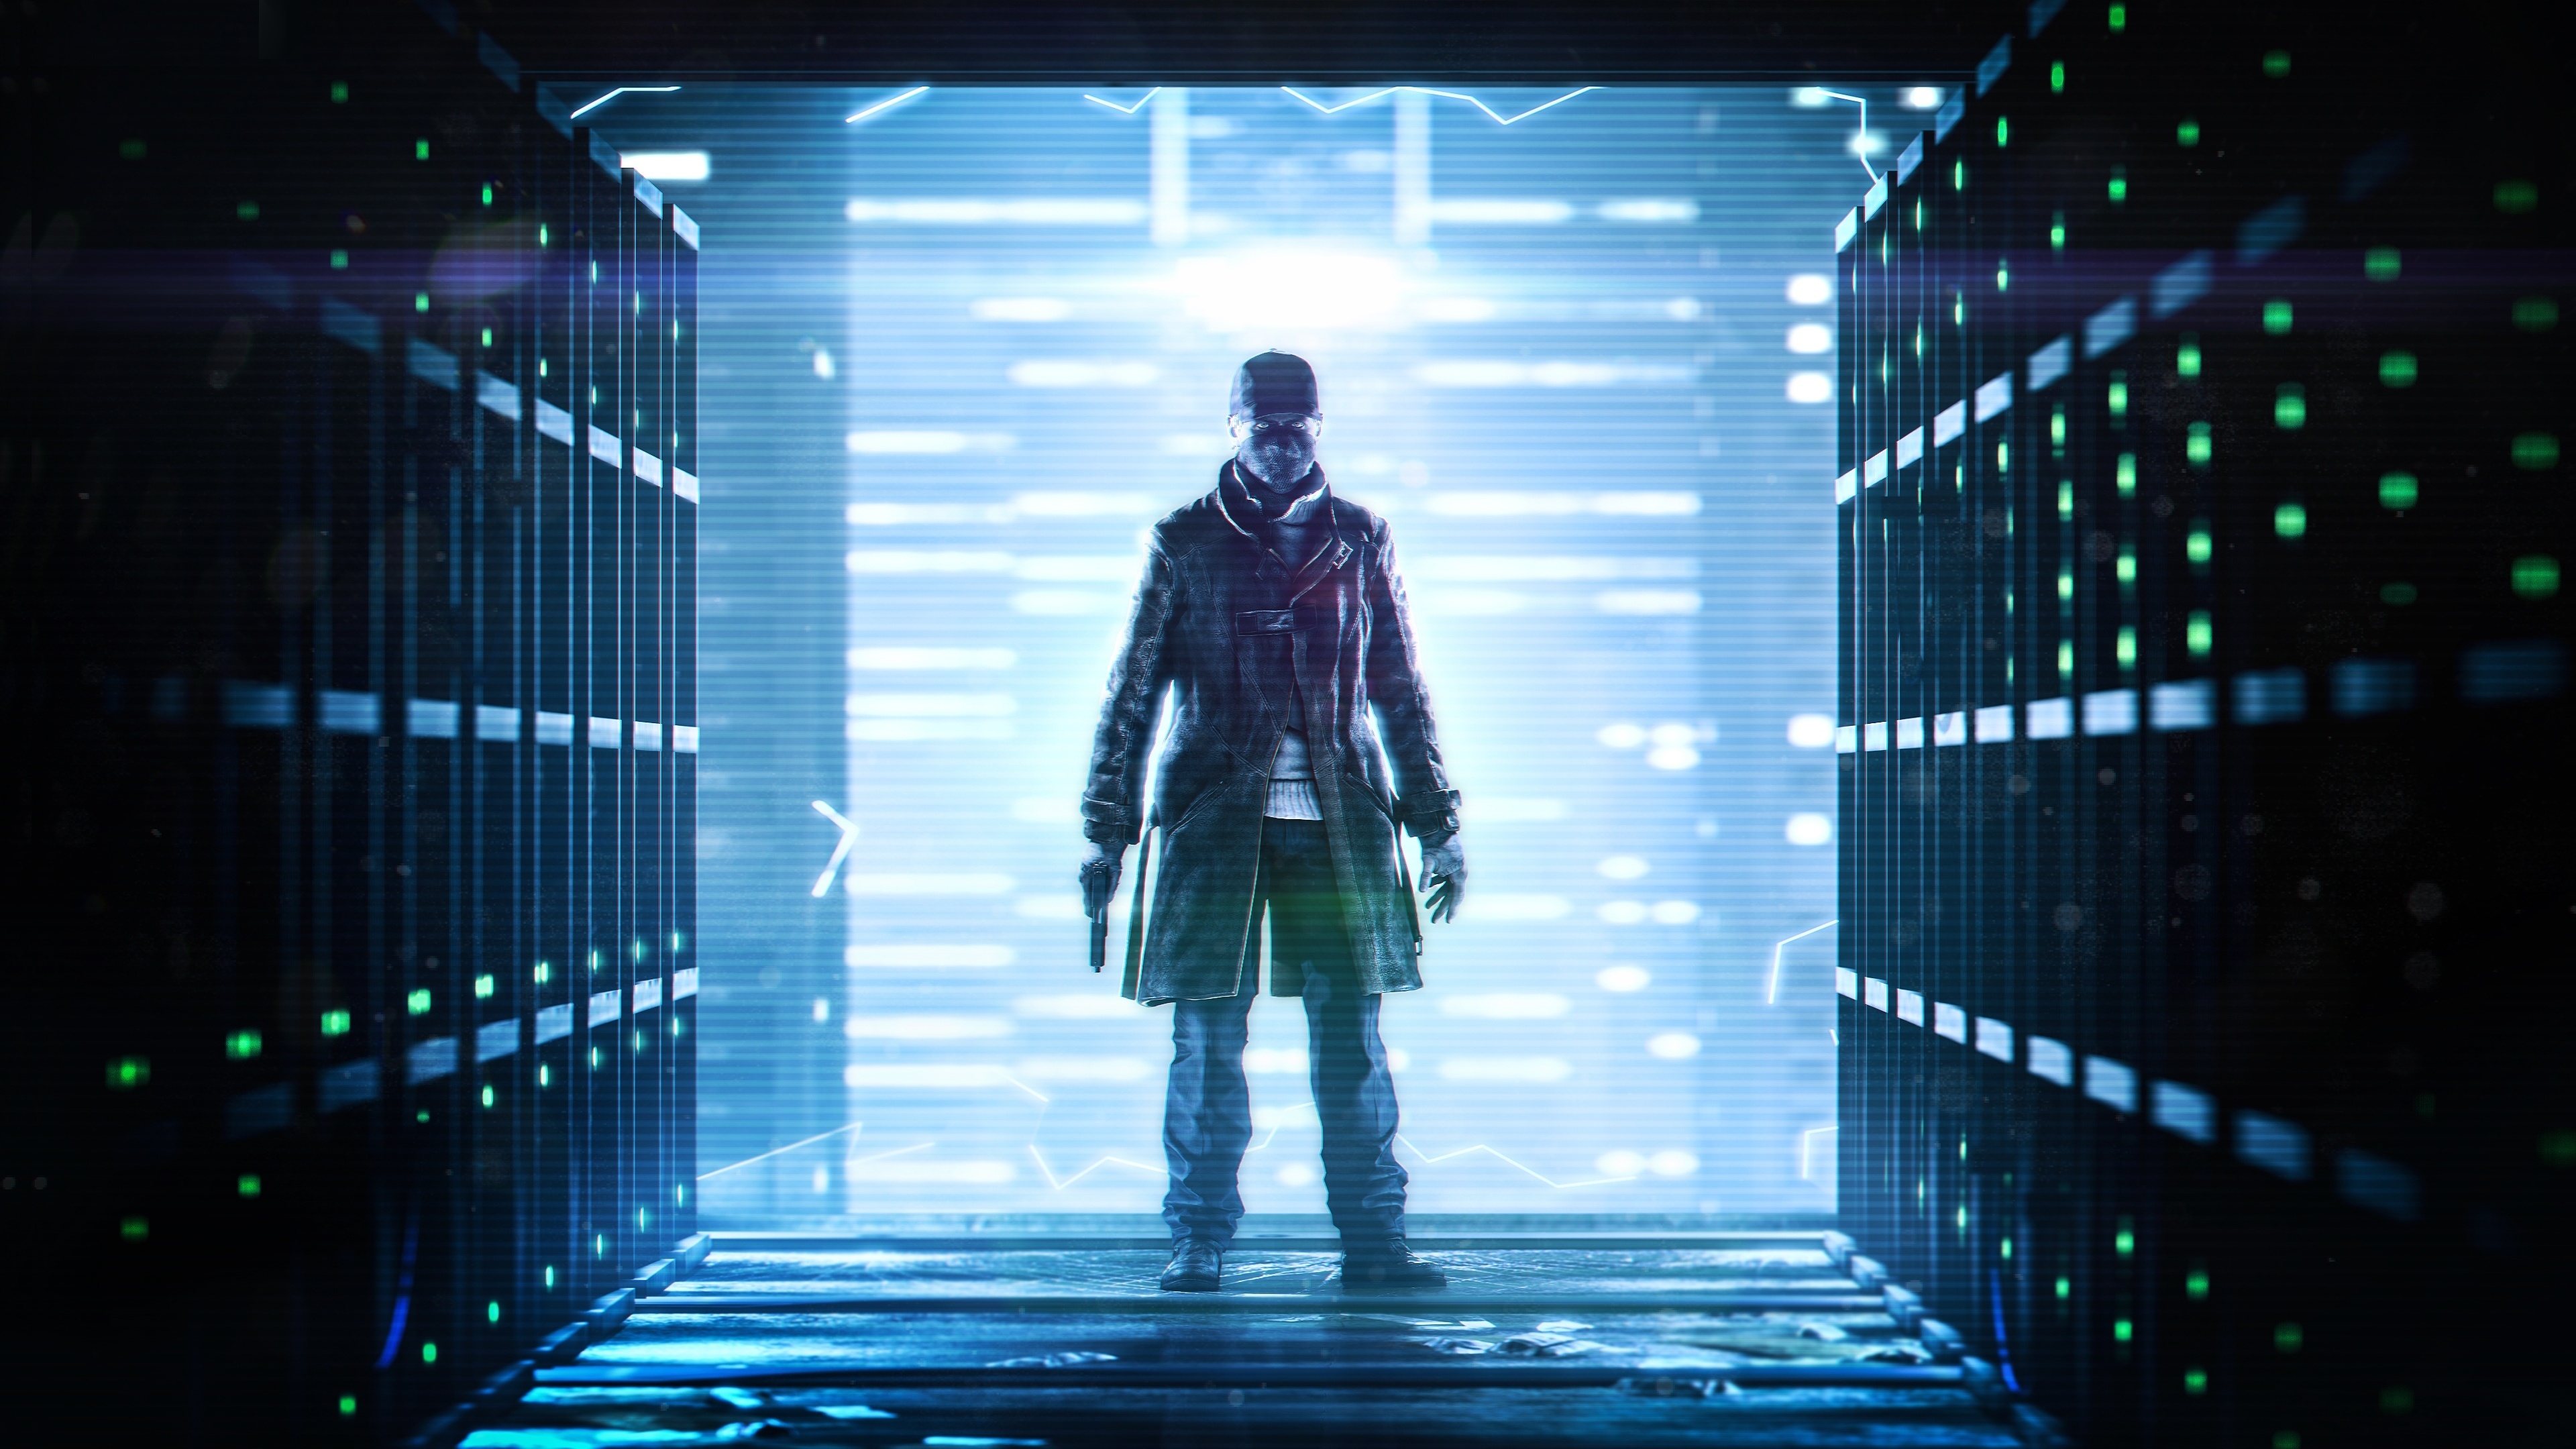 Download 3840x2160 wallpaper aiden pearce, video game, watch dogs, game